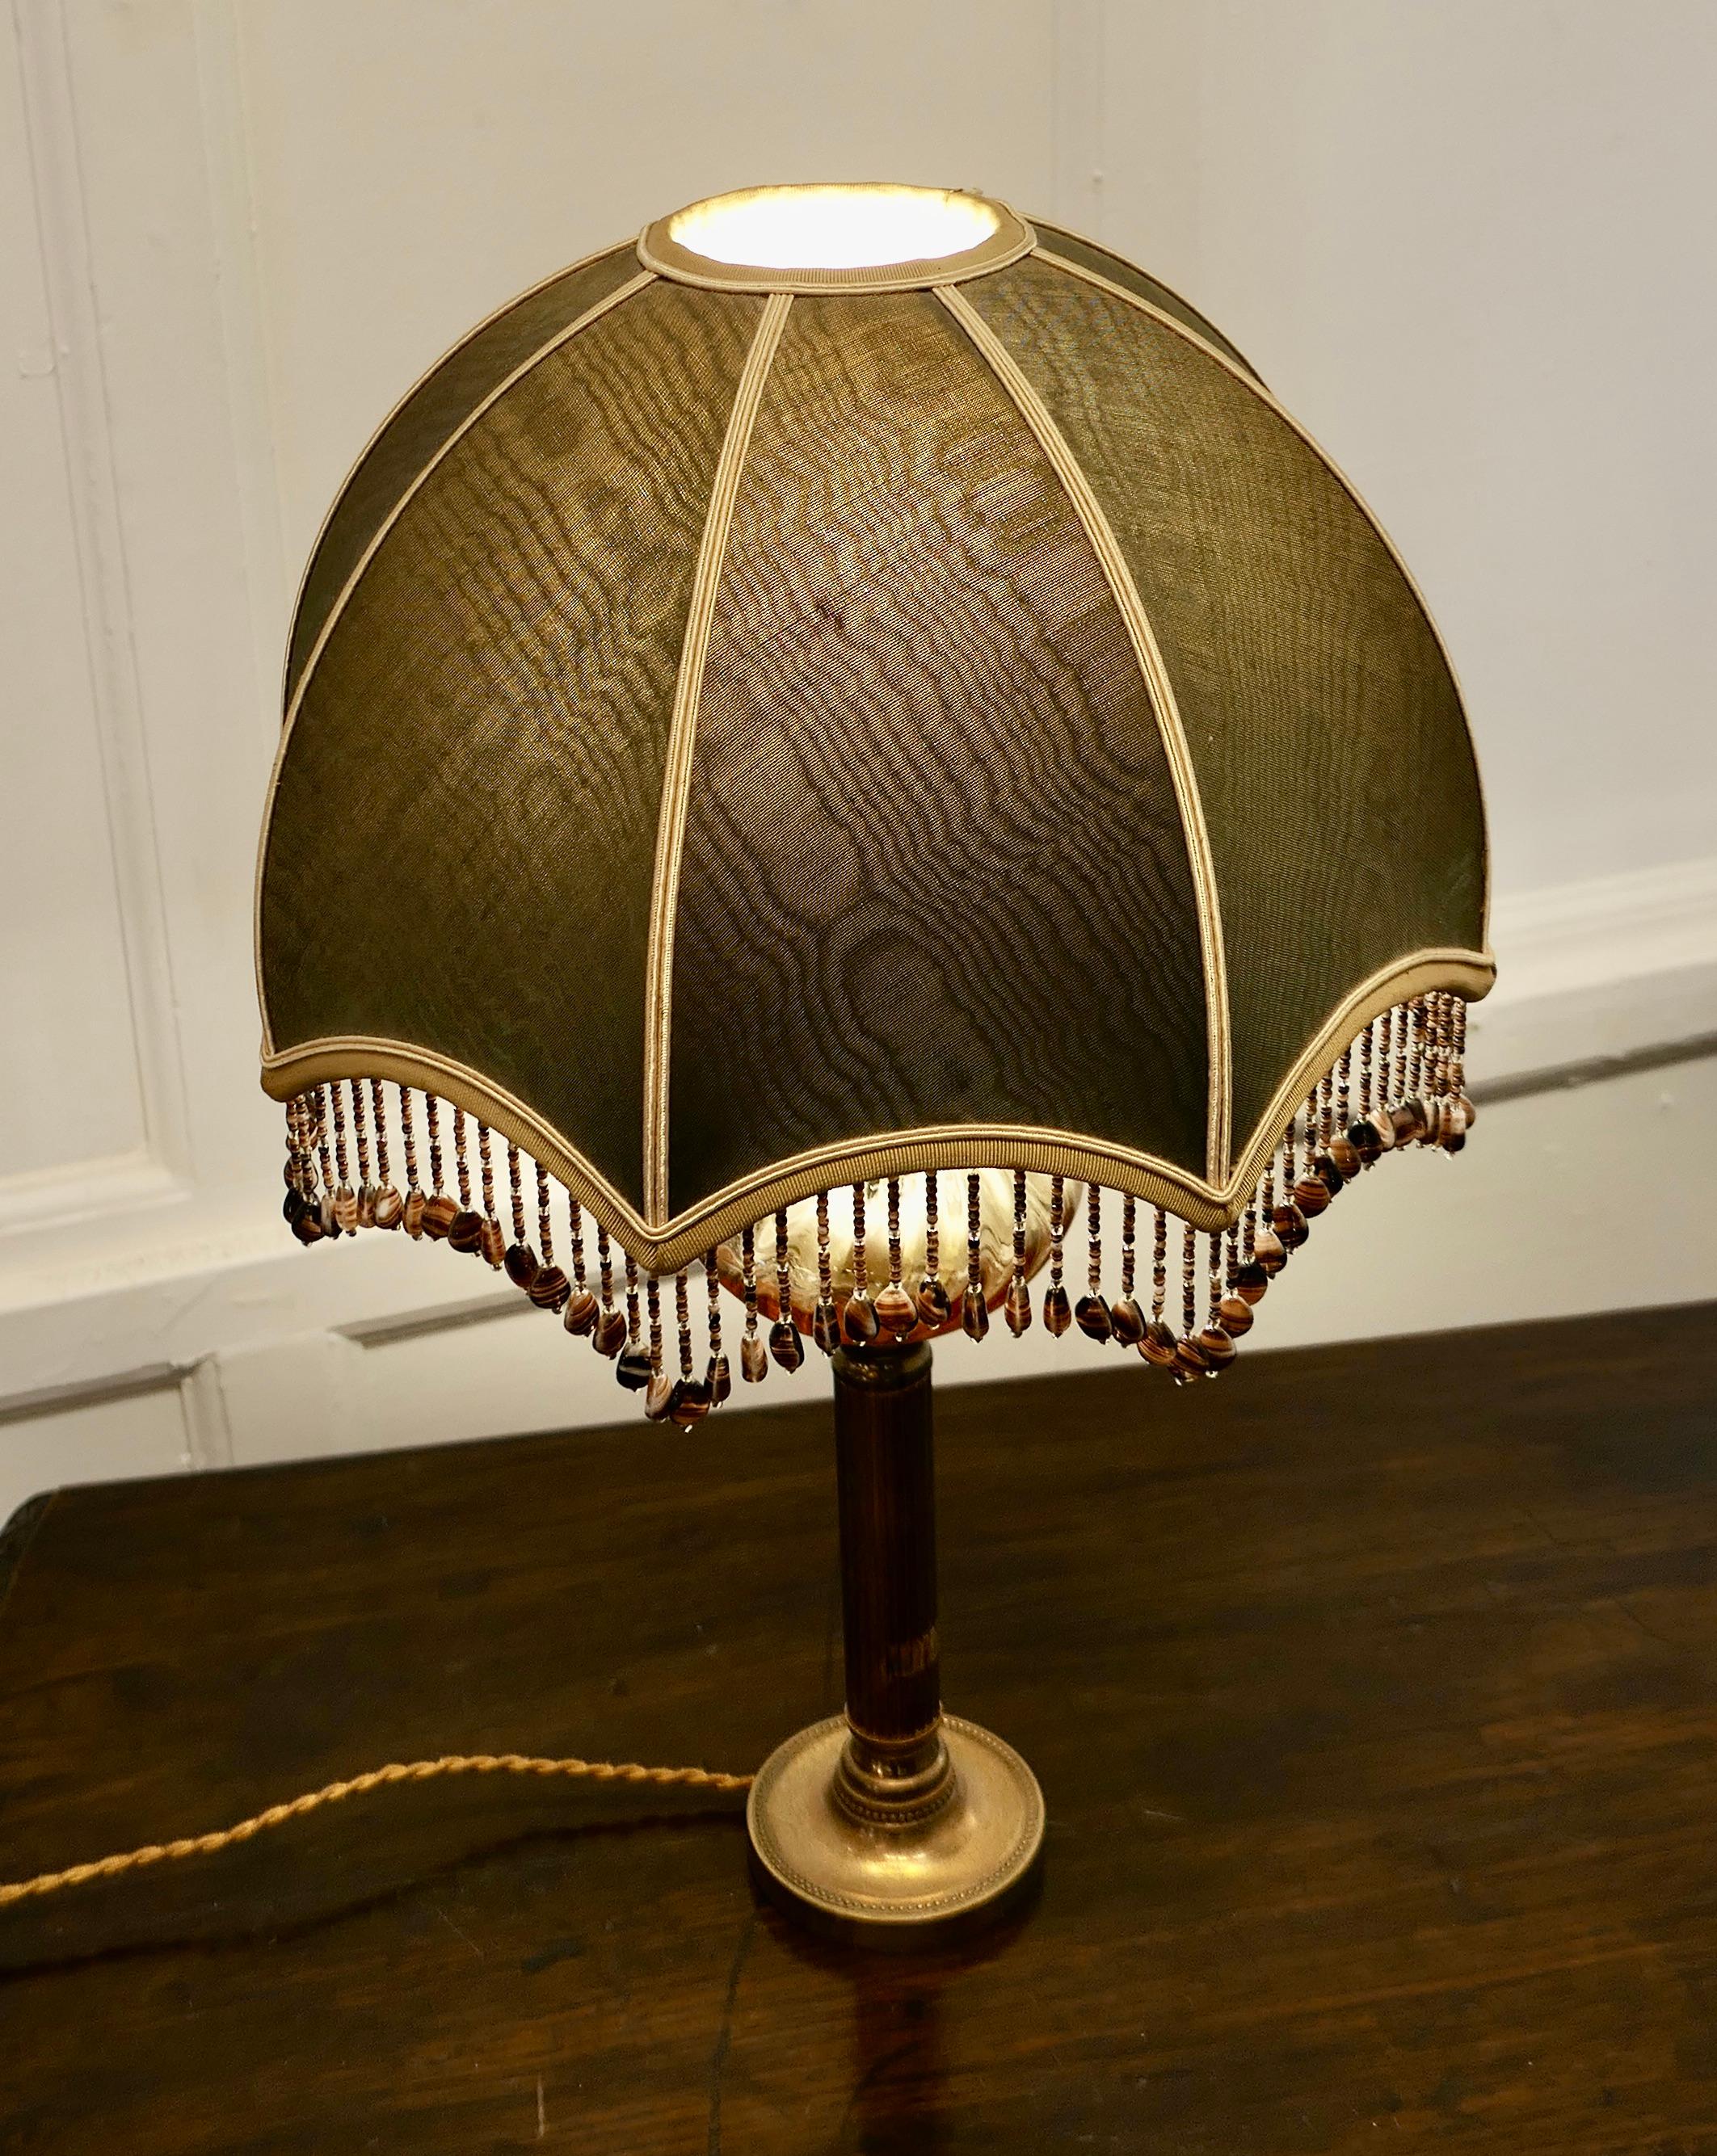 Early 20th Century French Table Lamp with Beaded Dome Lampshade